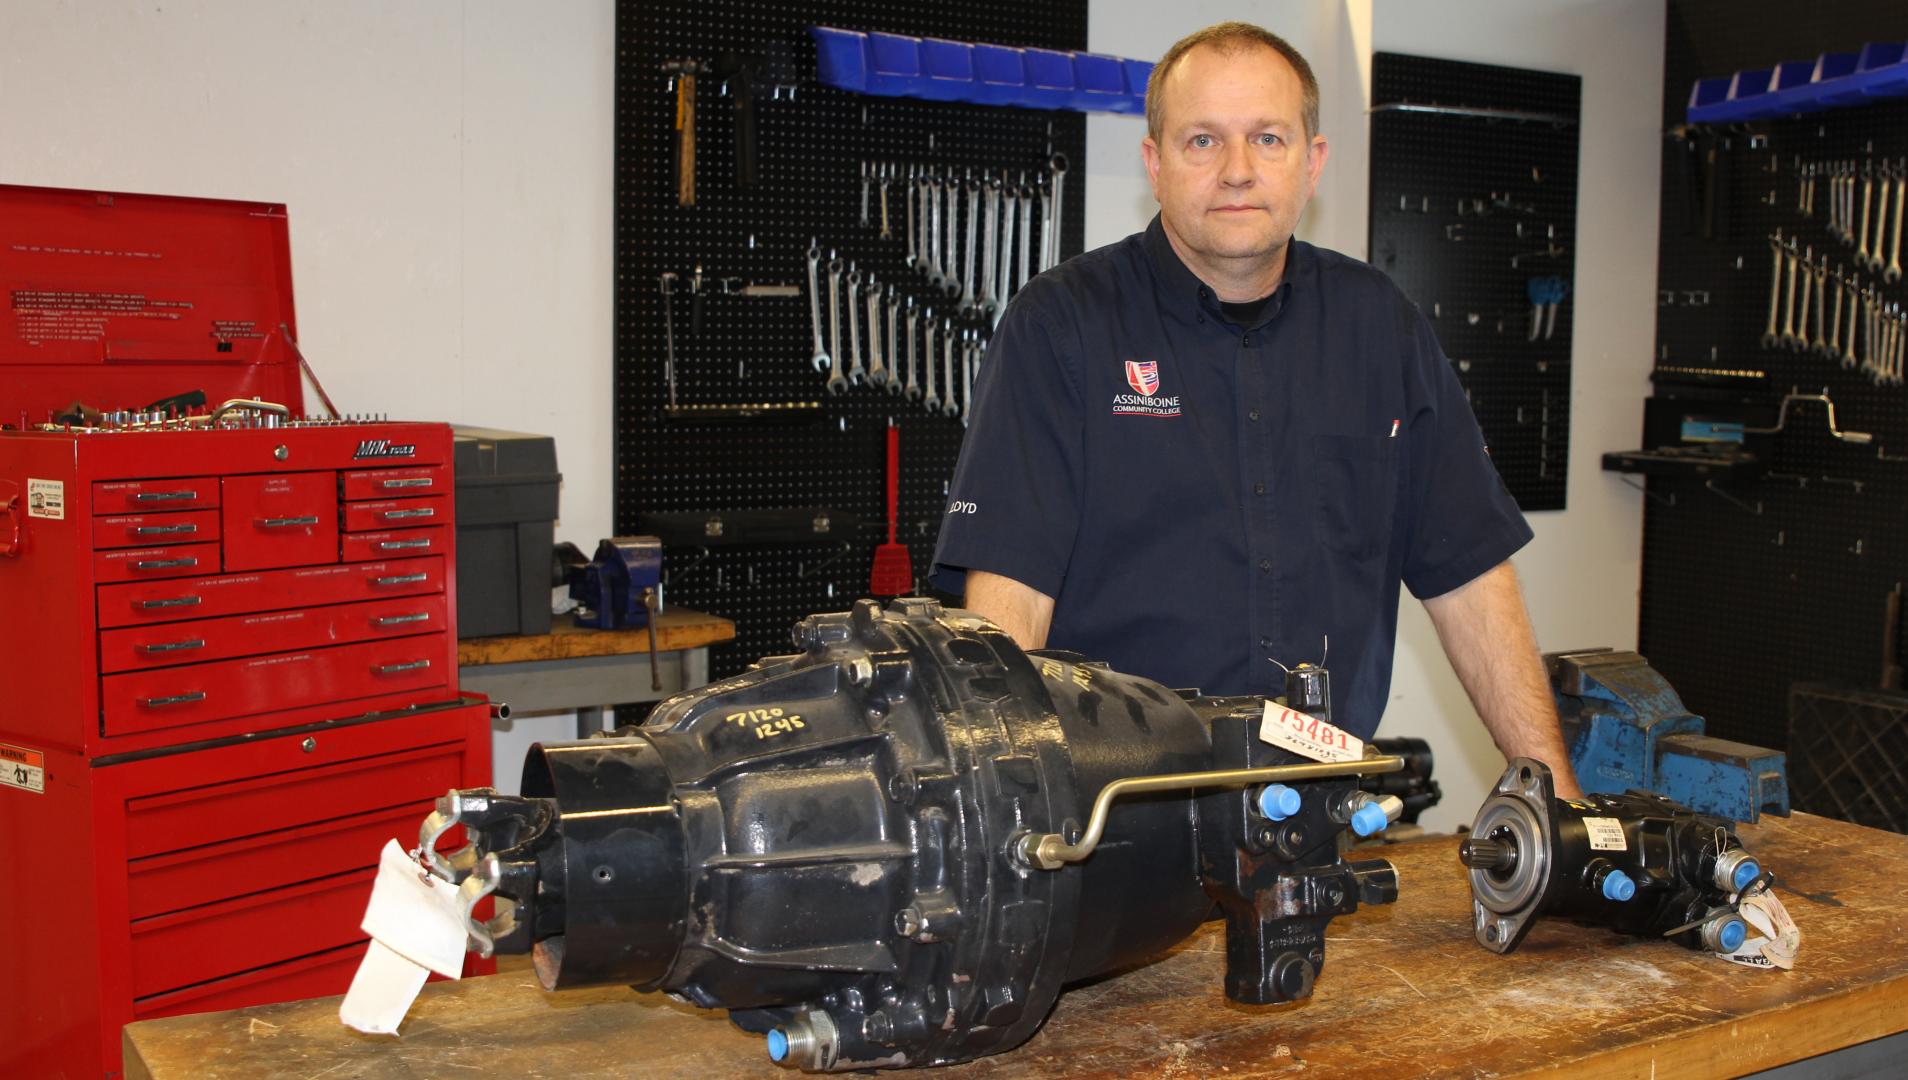 Lloyd Carey stands in his classroom, beside one of his donated items - a Case IH Combine CVT drive unit 